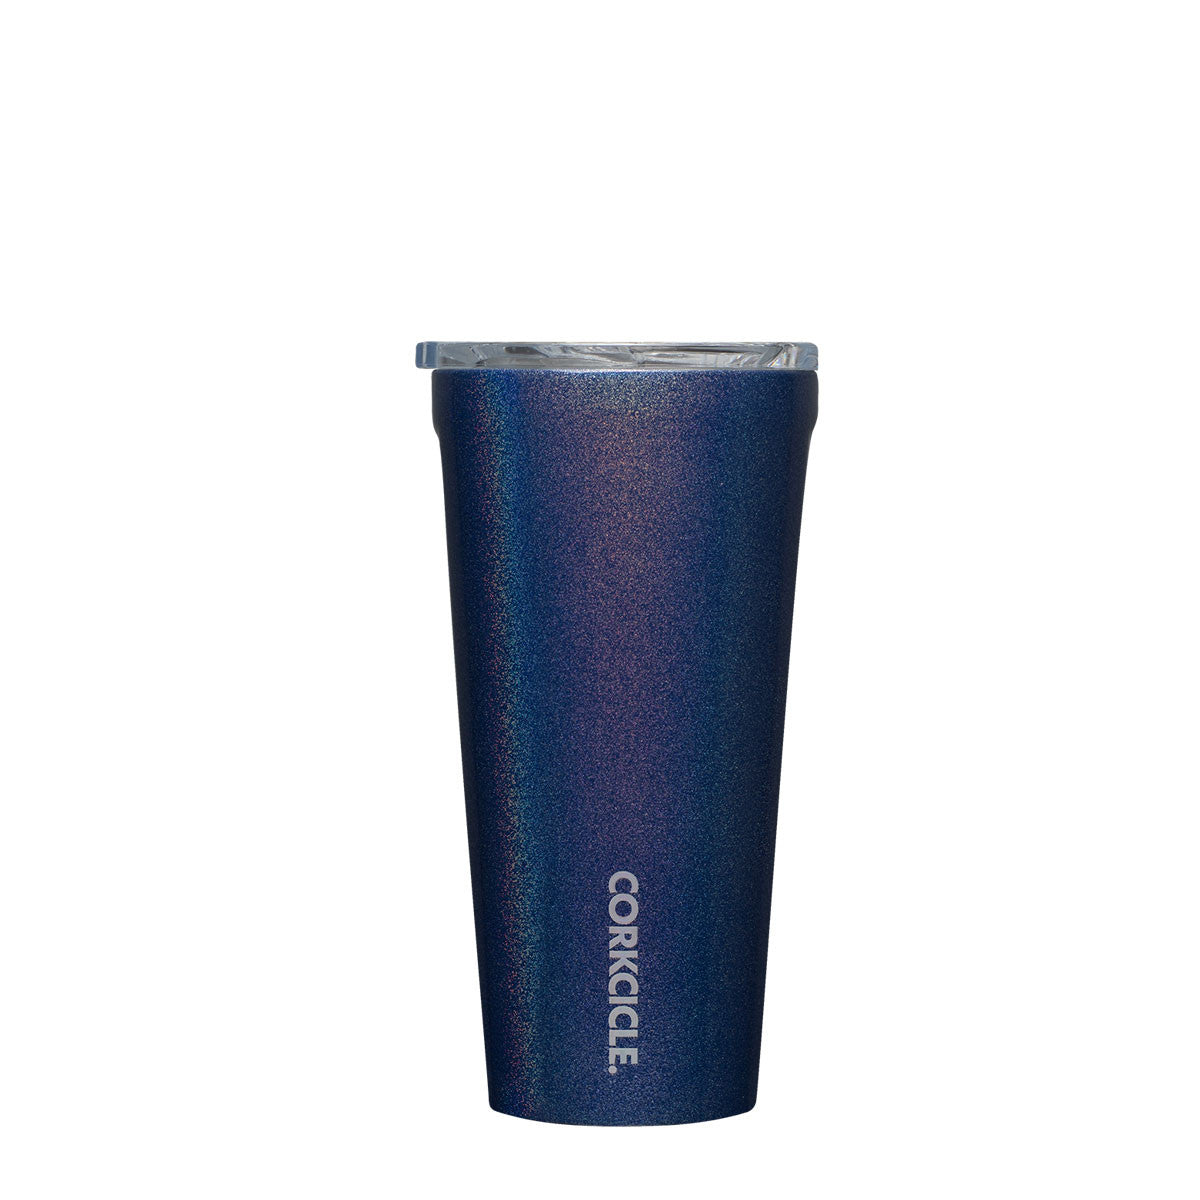 Midnight Magic 16 oz Stainless Steel Tumbler by Corkcicle